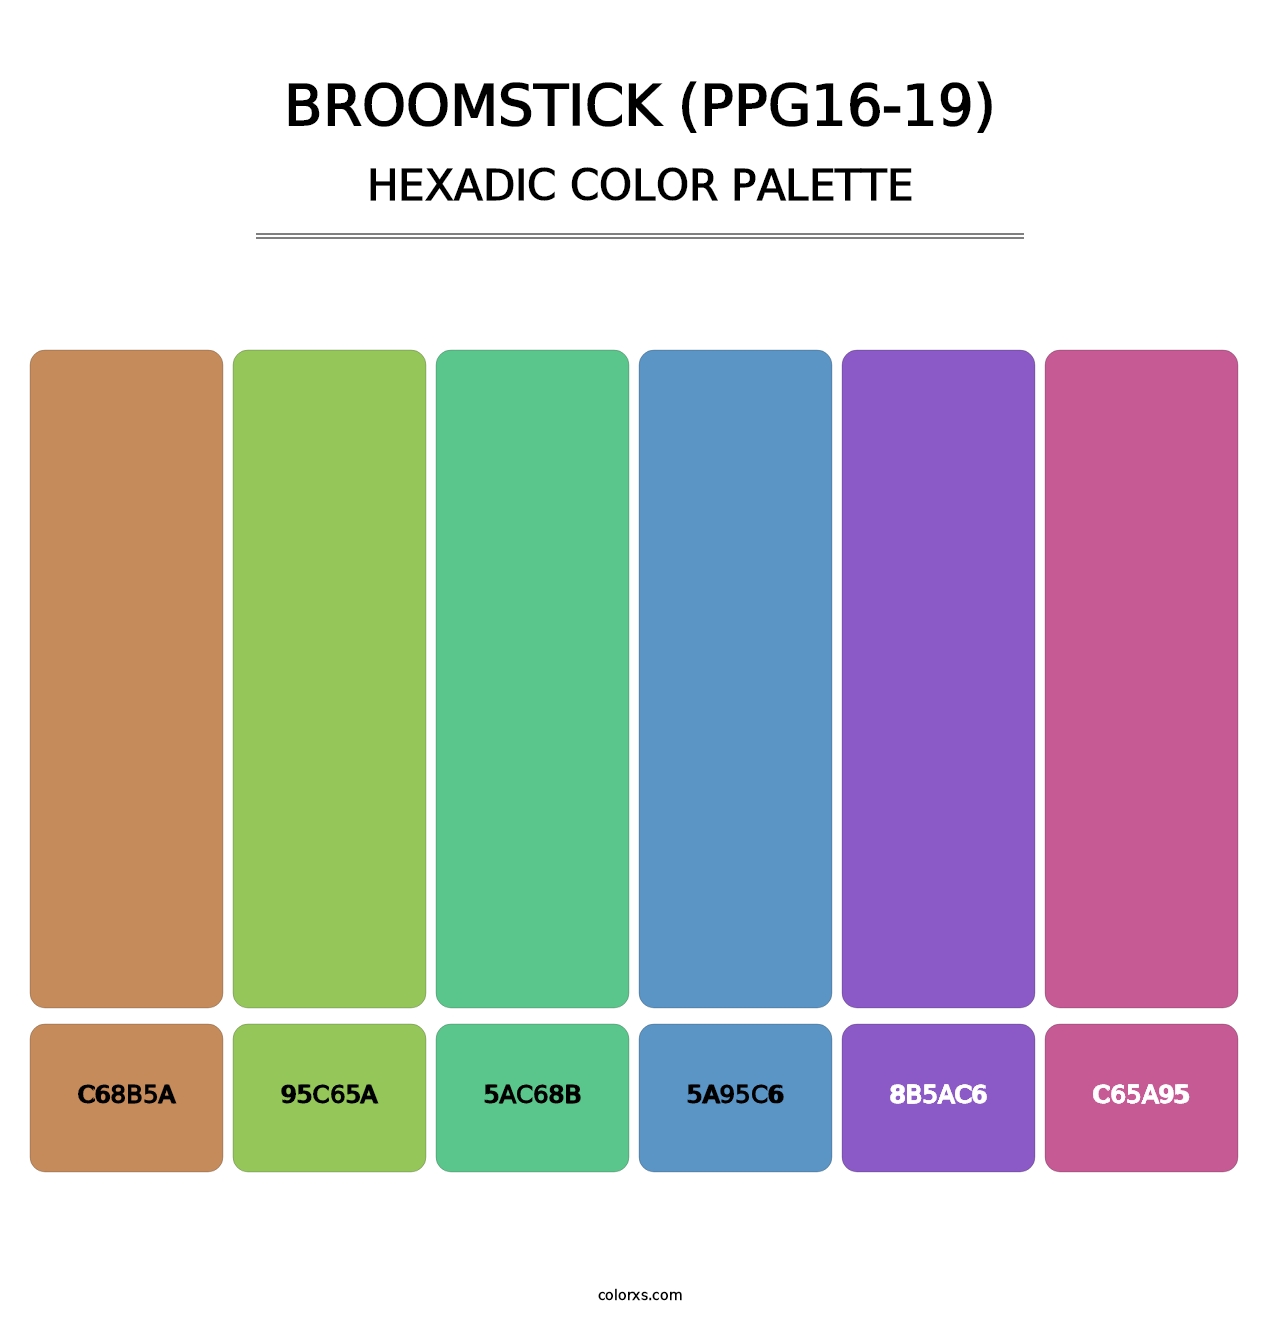 Broomstick (PPG16-19) - Hexadic Color Palette